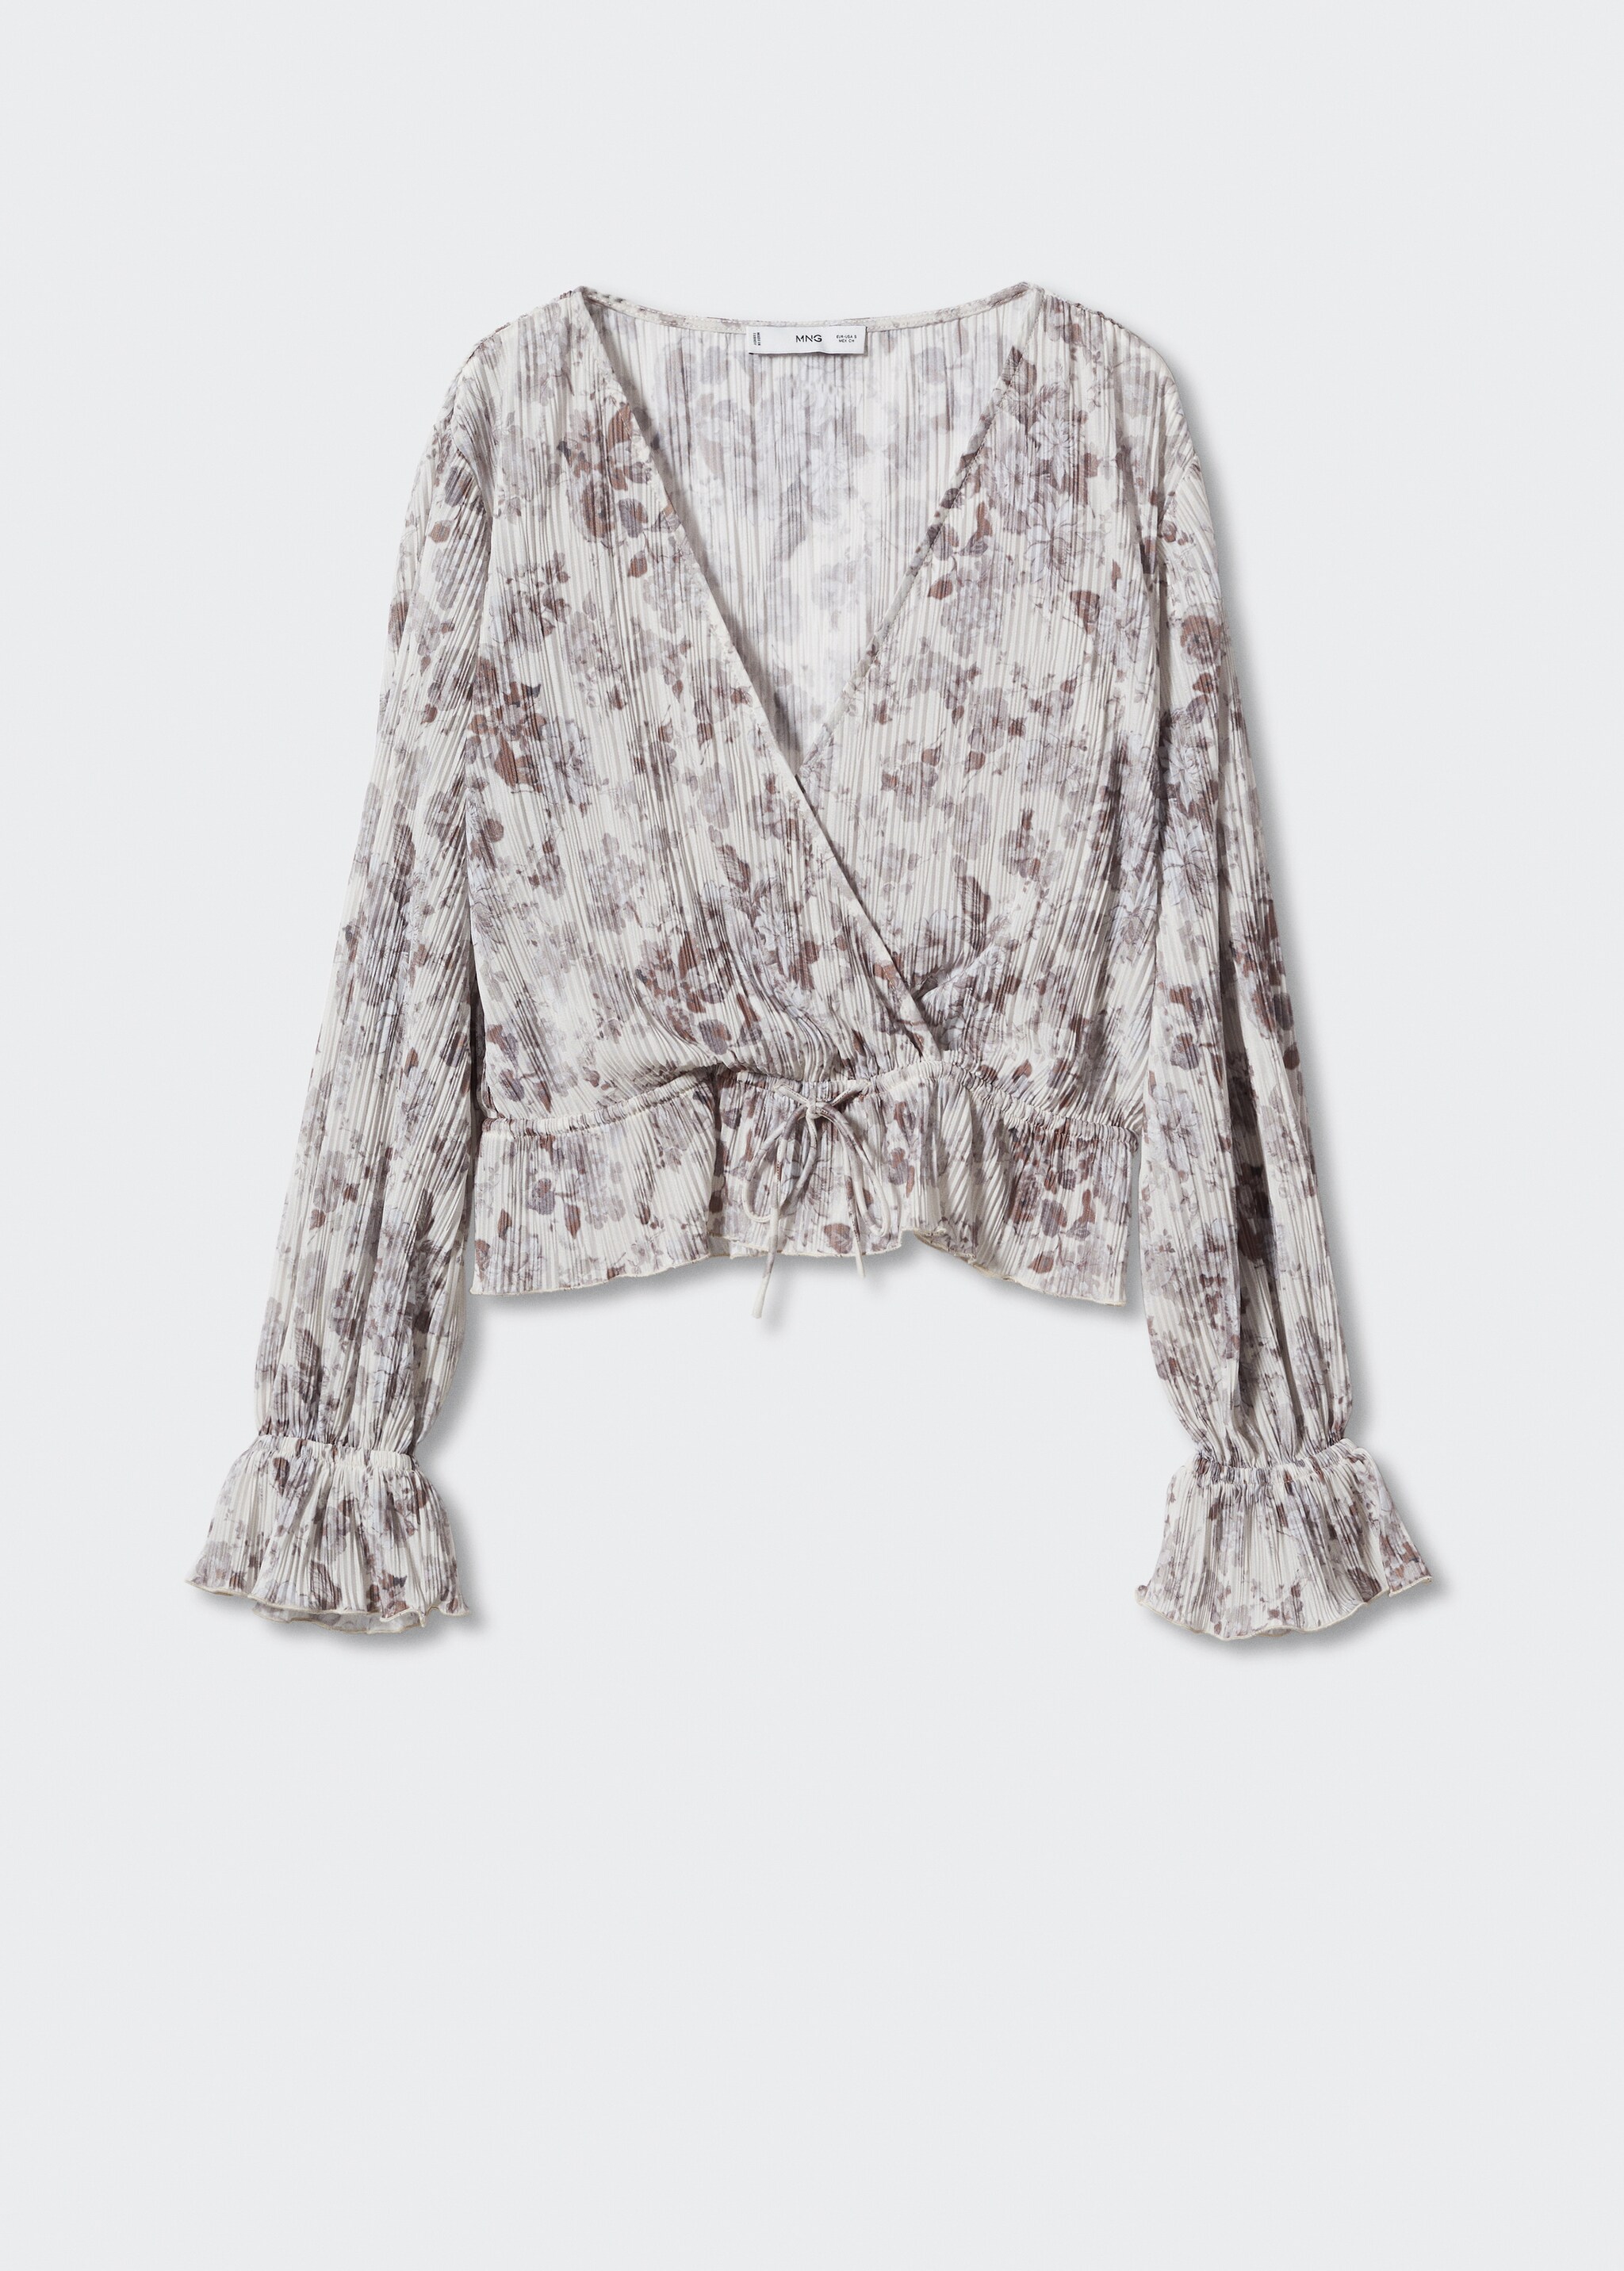 Pleated floral blouse - Article without model